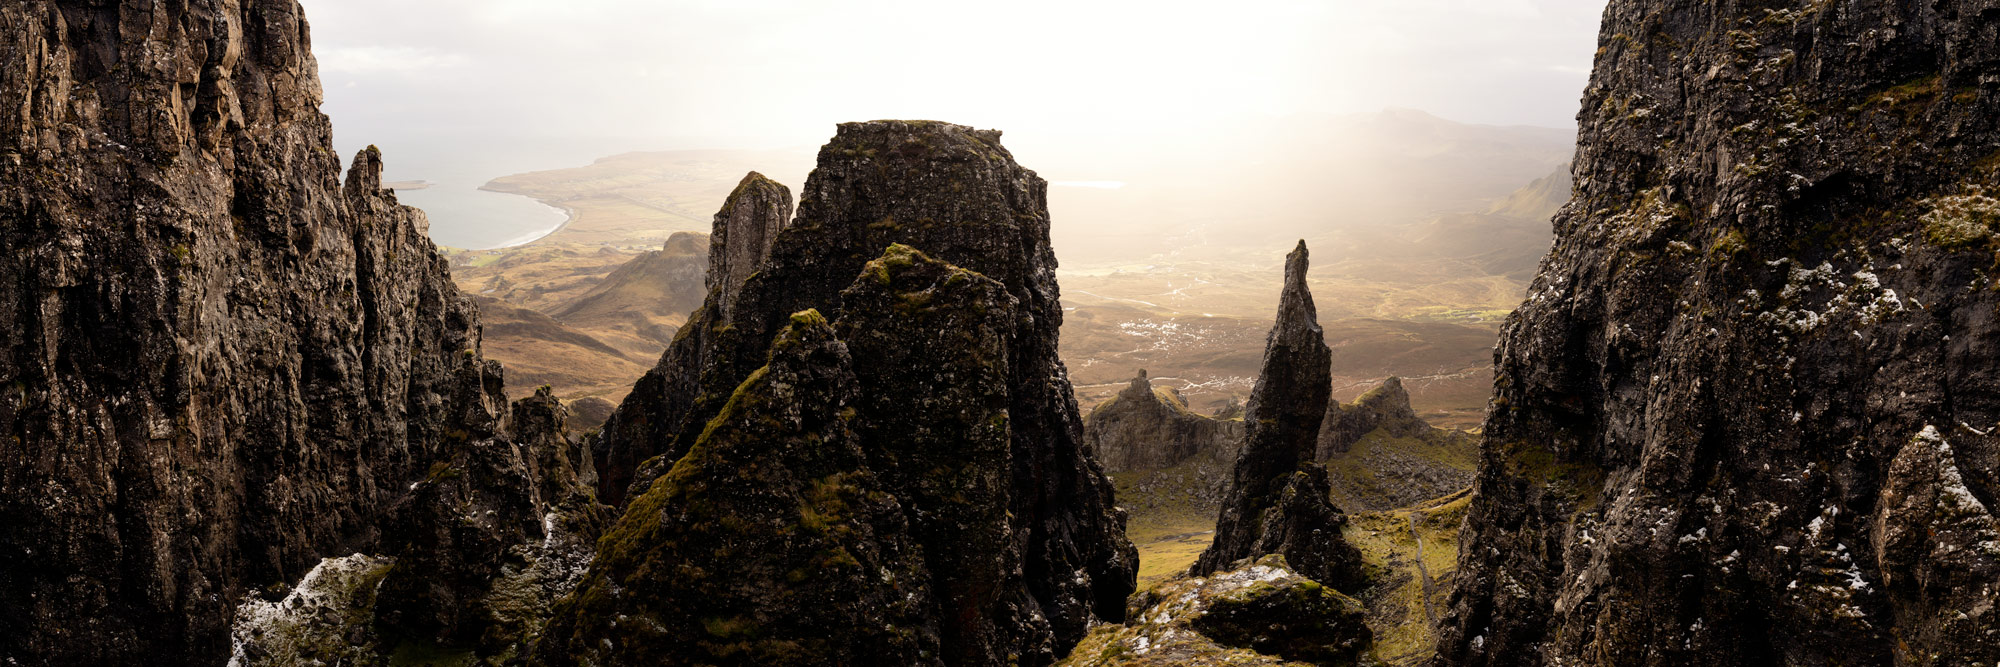 Panorama of the Needle at the Quiraing on the Isle of Skye